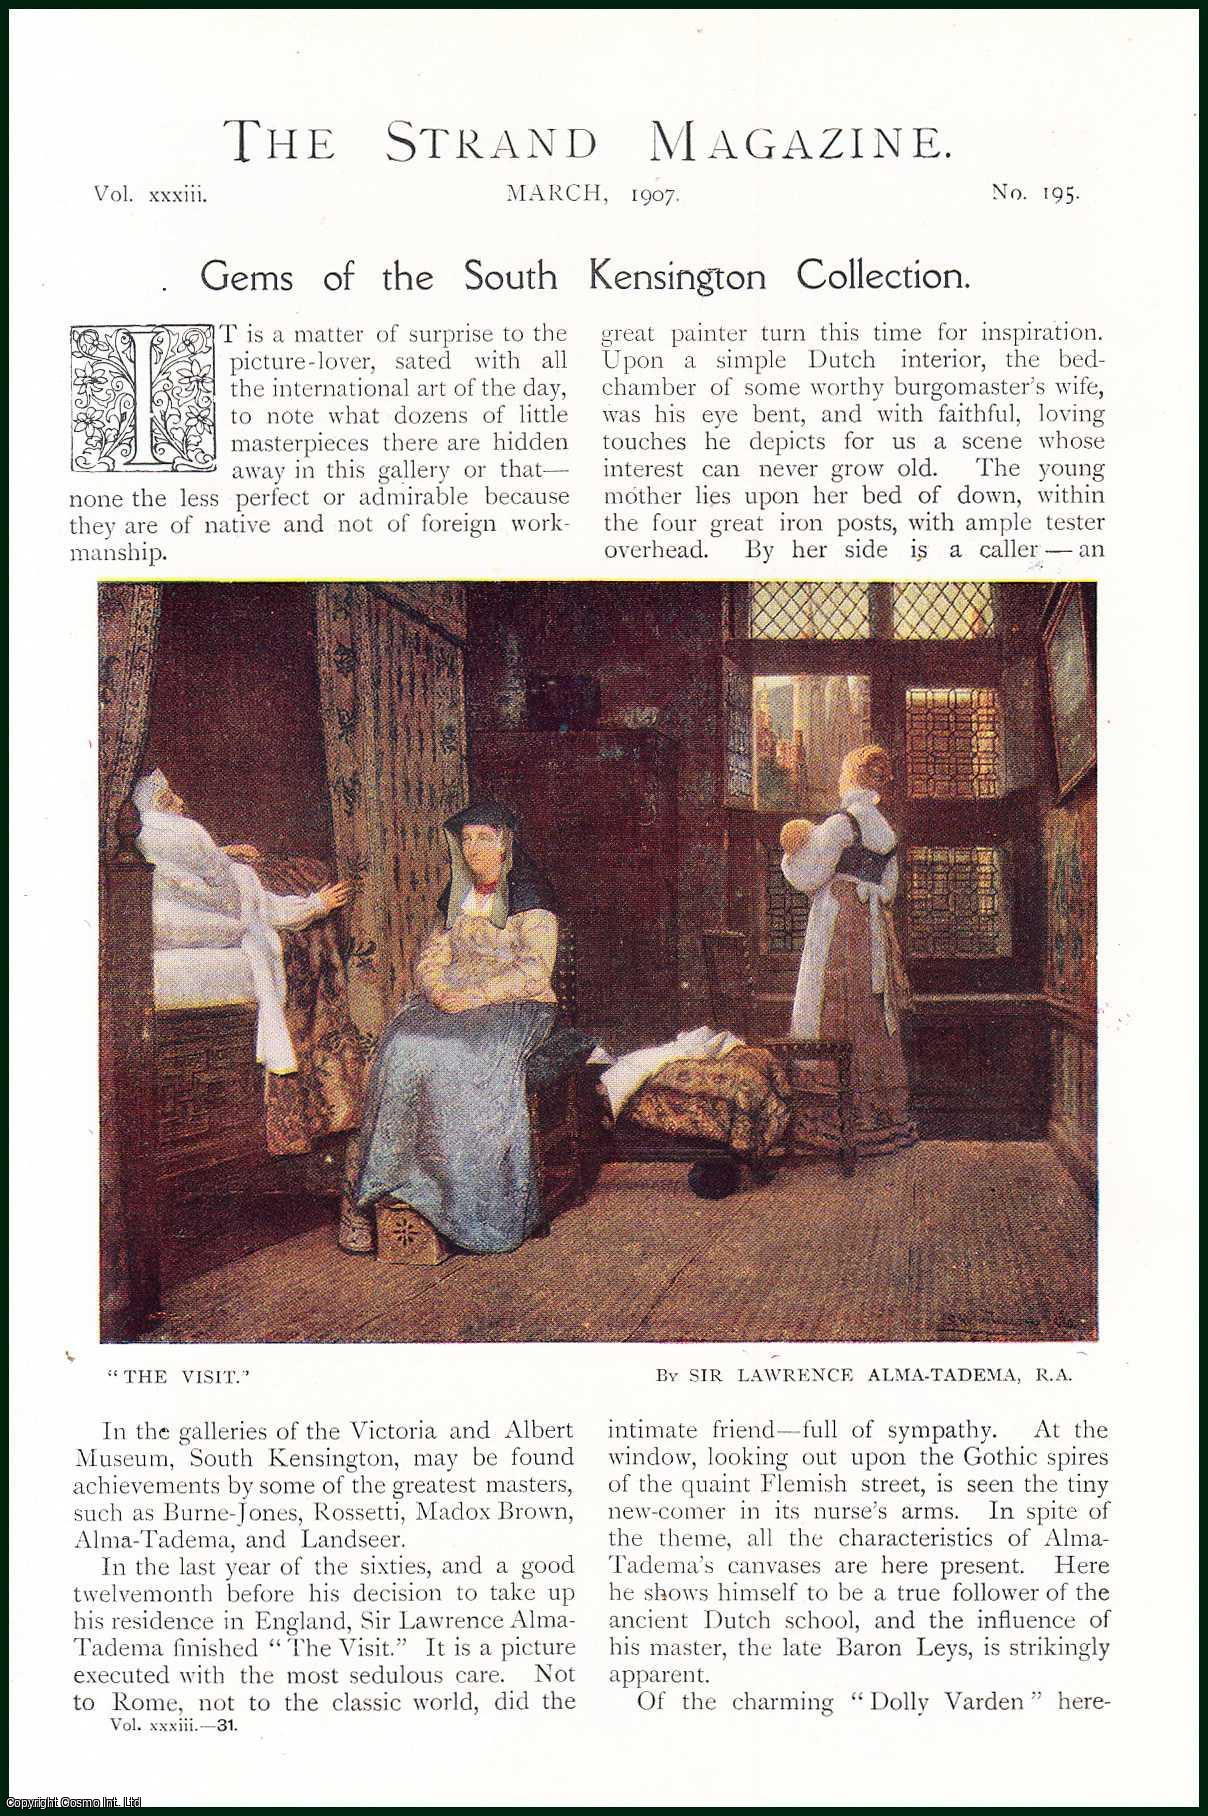 Strand Magazine - Art Gems of The South Kensington Collection. An original article from The Strand Magazine, 1907.